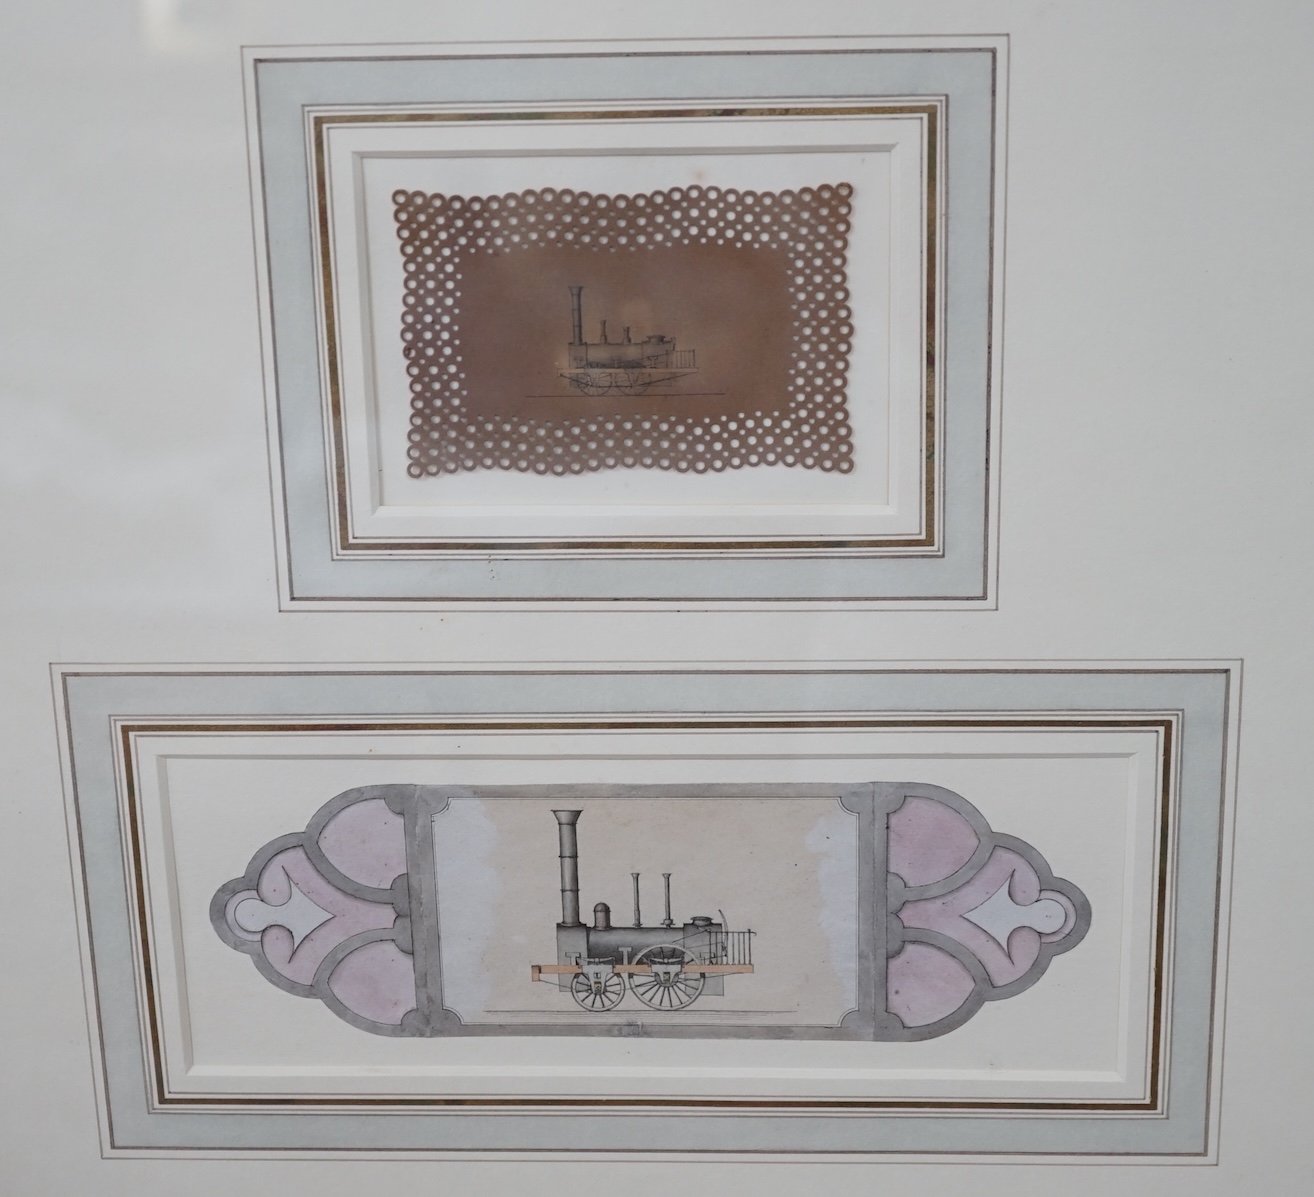 Charles Kinder, two miniature watercolour and ink studies of locomotives, framed as one, inscribed in pencil drawn by Charles Kinder, 1840, largest 7 x 9.5cm. Condition - fair